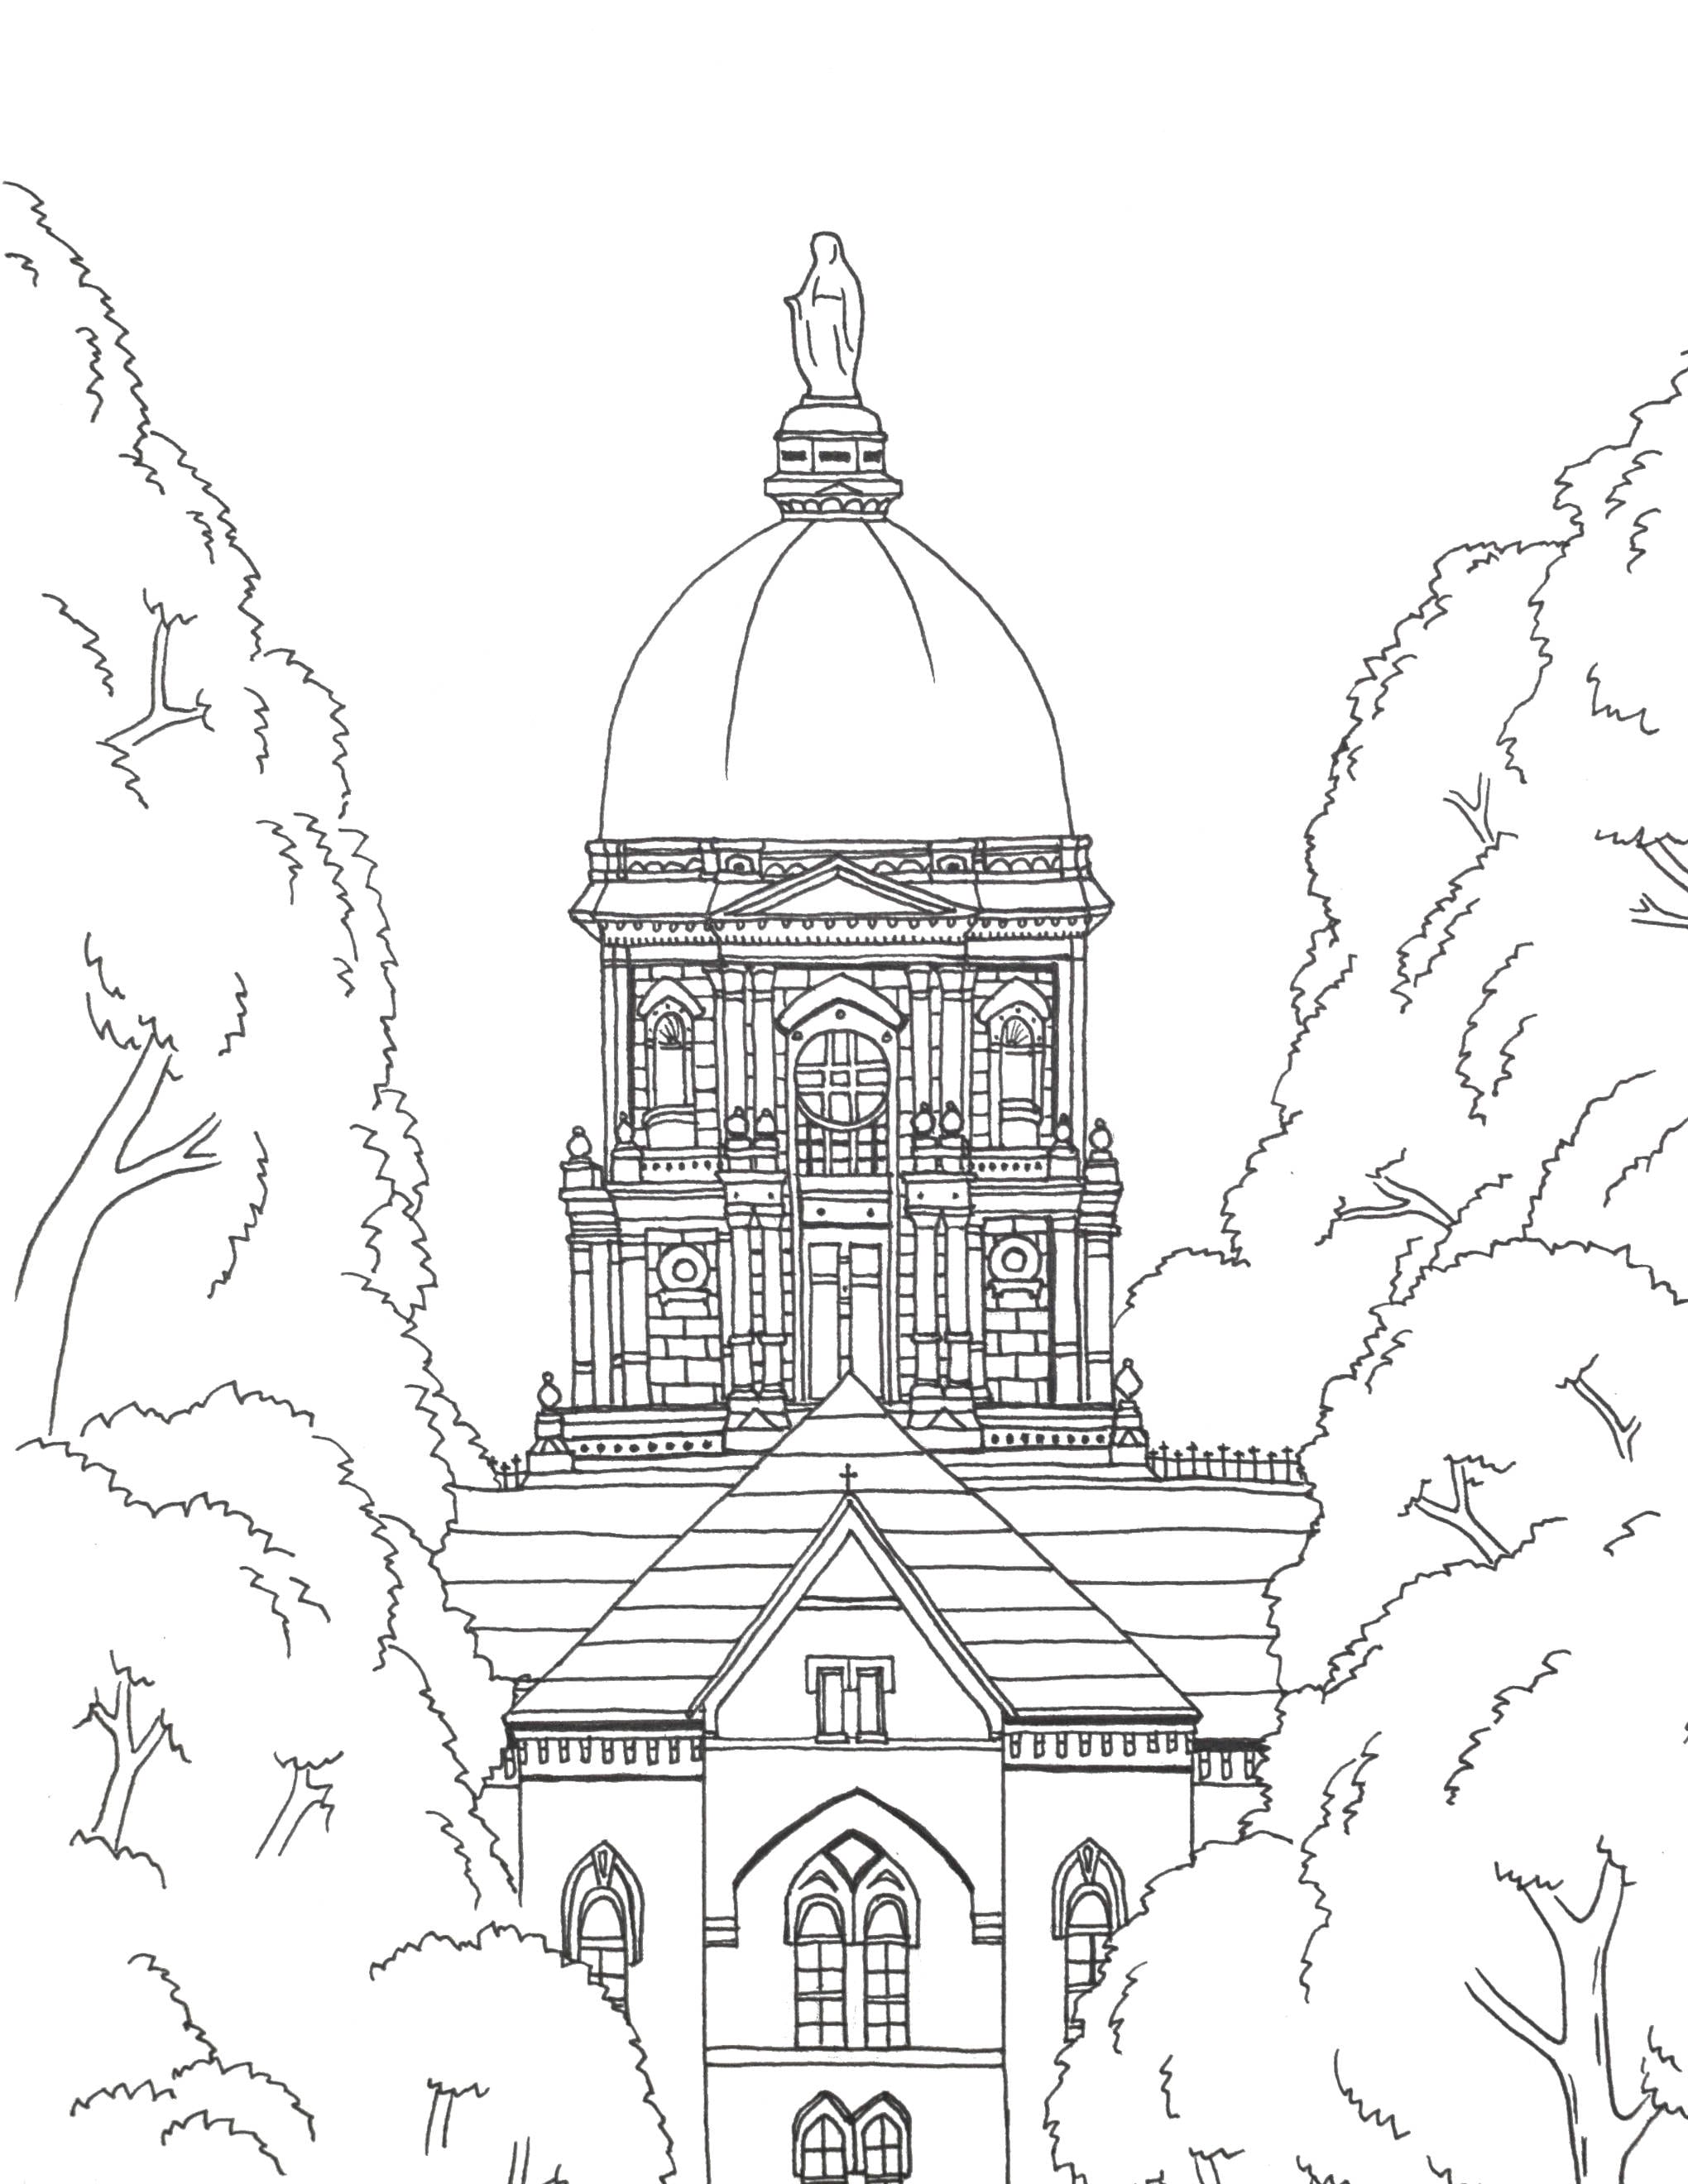 Notre dame golden dome printable art adult coloring book page fighting irish artwork university campus south bend digital download